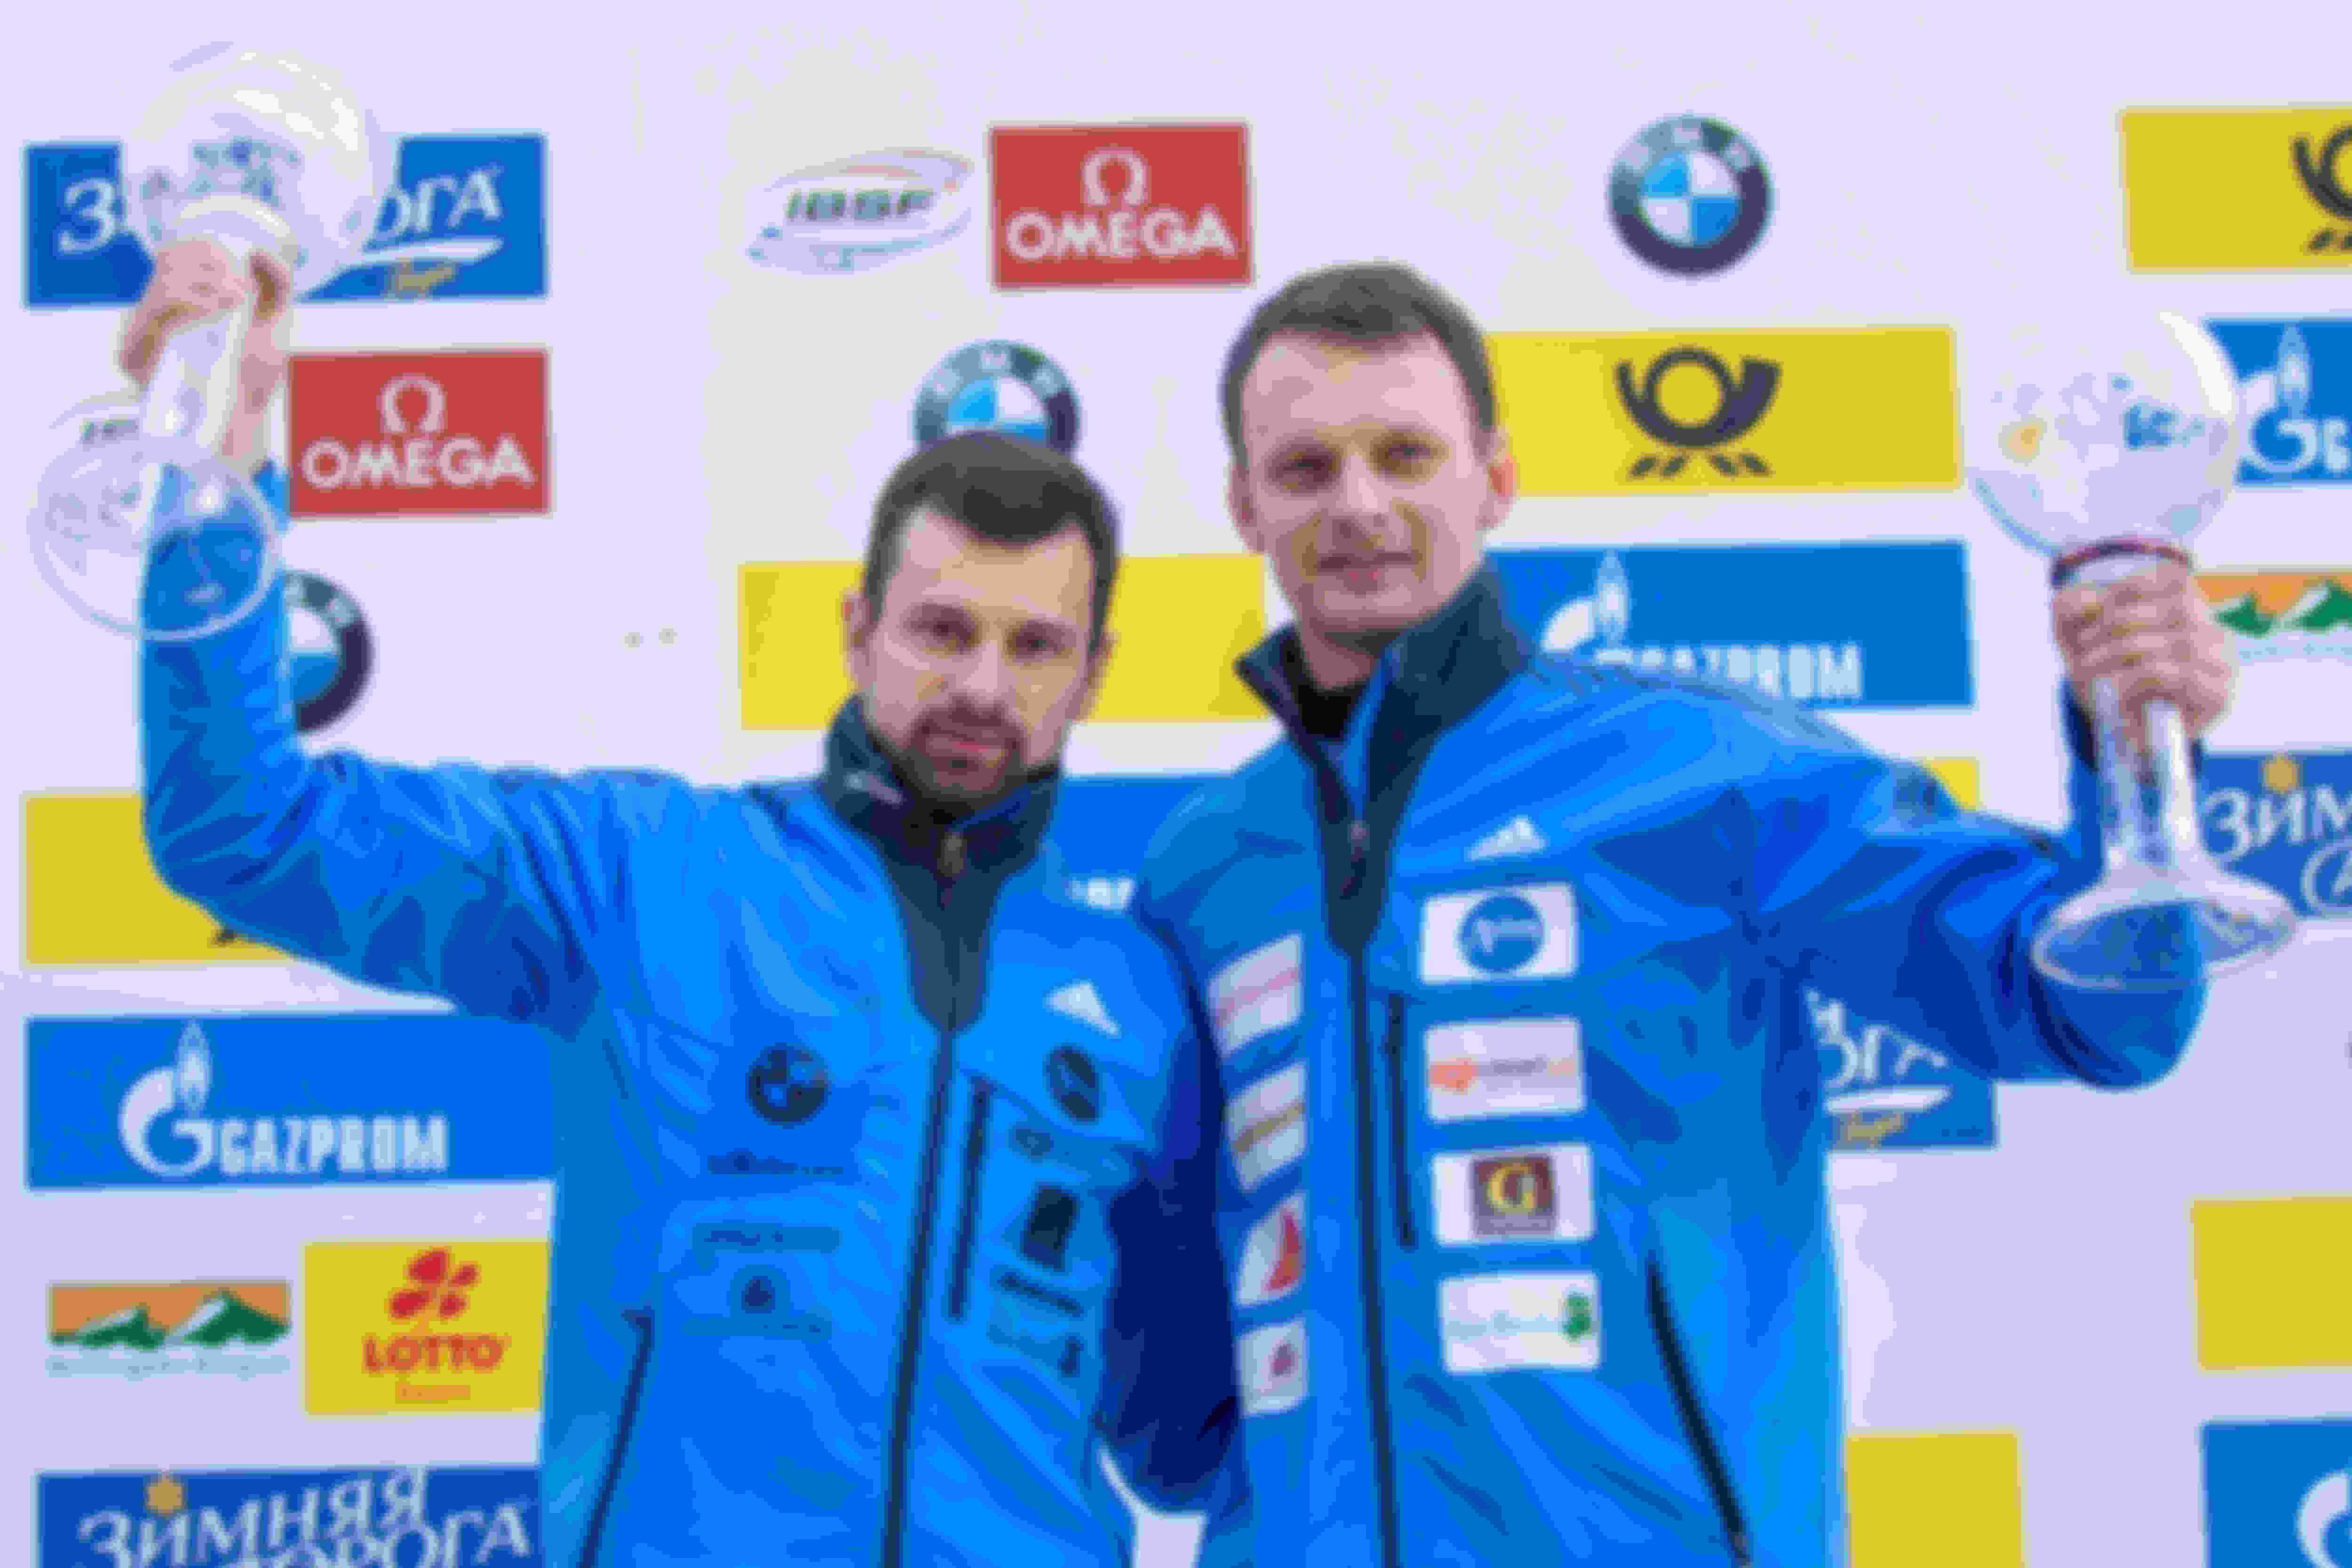 Martins Dukurs (left) and Tomass Dukurs (right) celebrate on the podium at the 2016 Skeleton World Cup in Koenigsee, Germany.